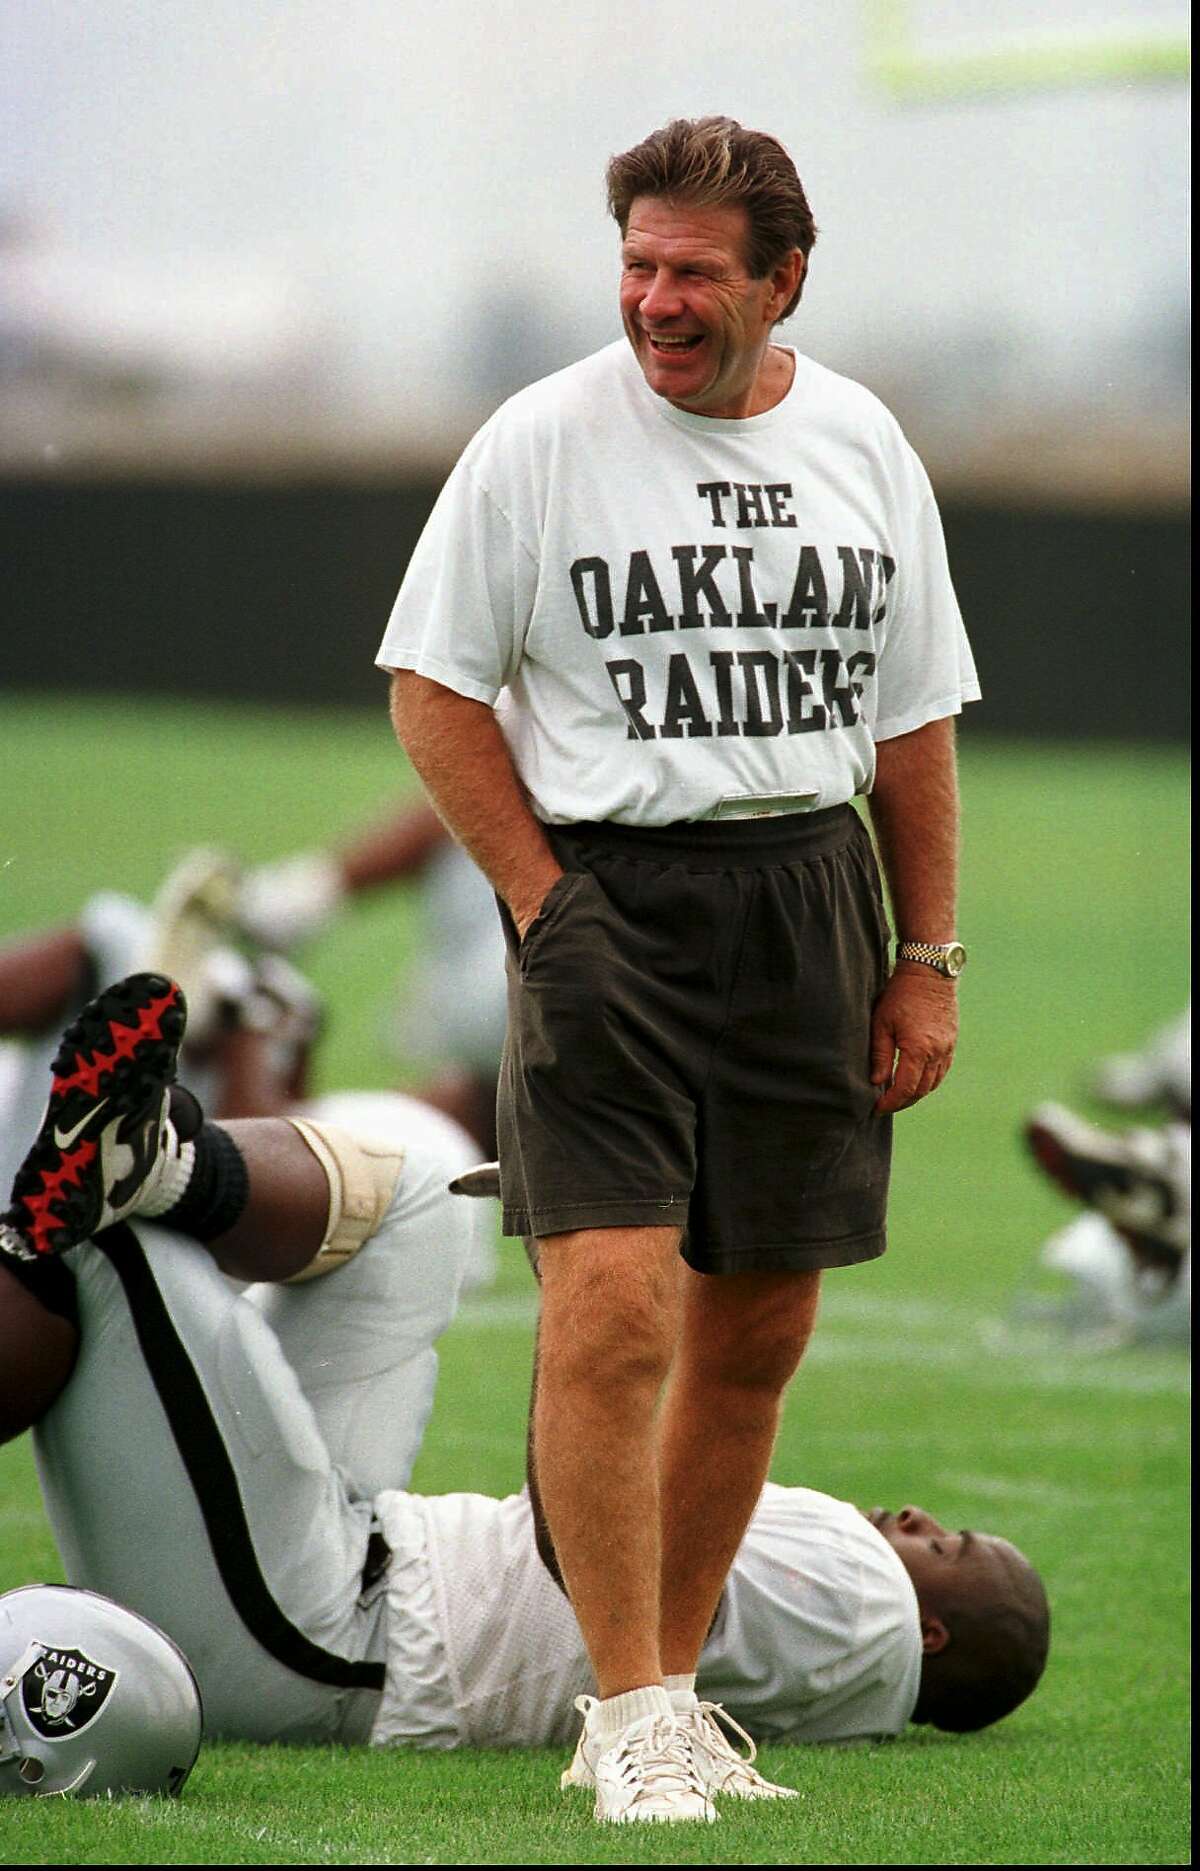 Oakland Raiders head coach Joe Bugel enjoys a laugh during practice at the Raiders' training facility in Alameda, Calif., Tuesday, Aug. 19, 1997. (AP Photo/John Todd) ALSO RAN: SPECIAL SPORTS SECTION: "PRO FOOTBALL '97 / SEASON PREVIEW / A NEW 49ERS ERA" 08/29/97.